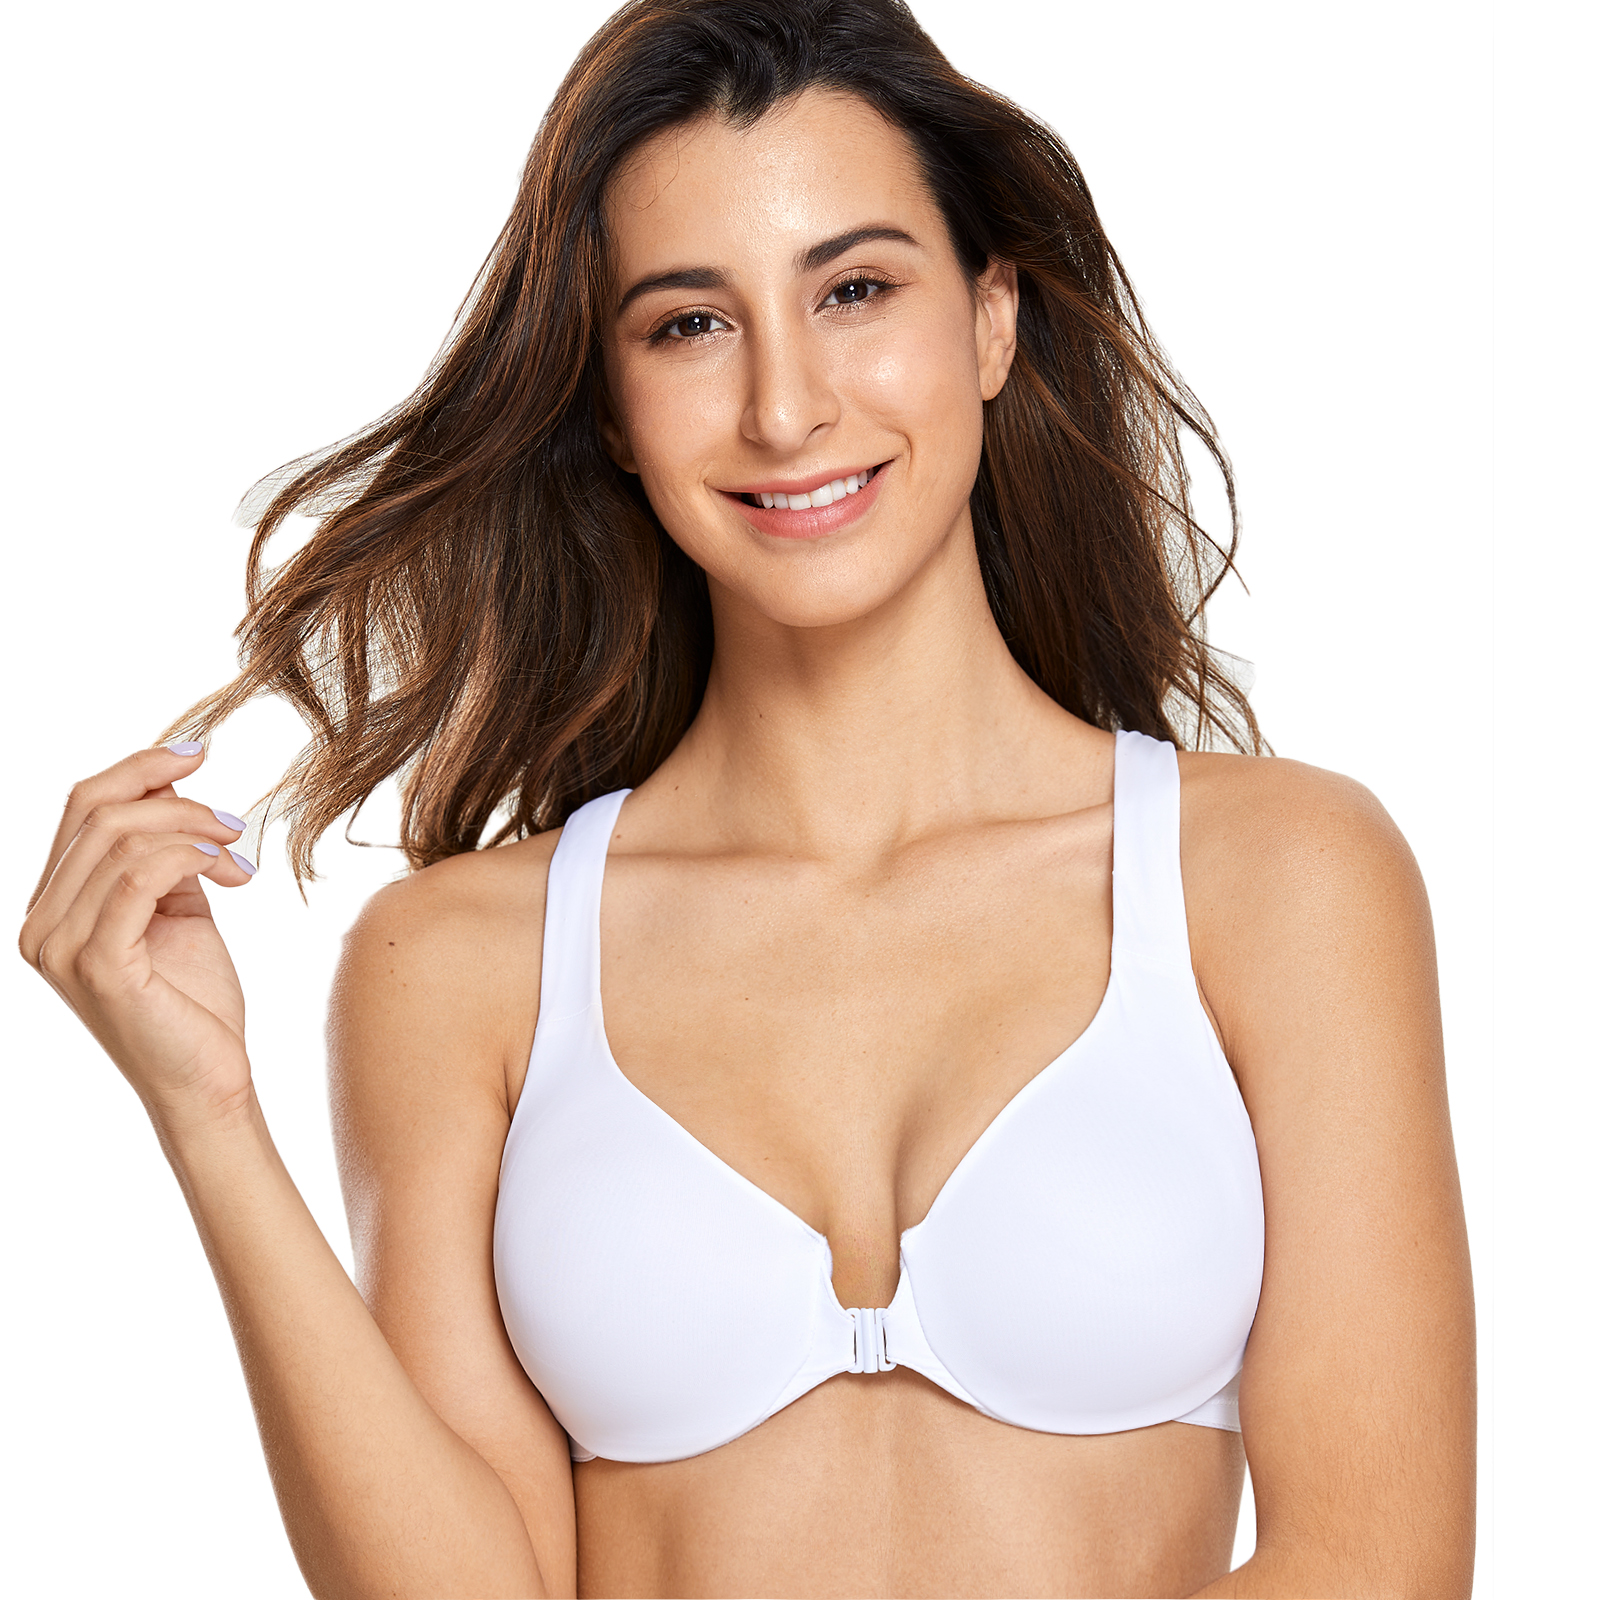 Trylo Intimates on X: The Front Open Bra makes getting dressed and  undressed a breeze with its easy-access front closure. Product shown - Riza  Front Open #TryloIndia #TryloIntimates #RizaIntimates #RizabyTrylo  #Rizafrontopen #feelthefreedom #